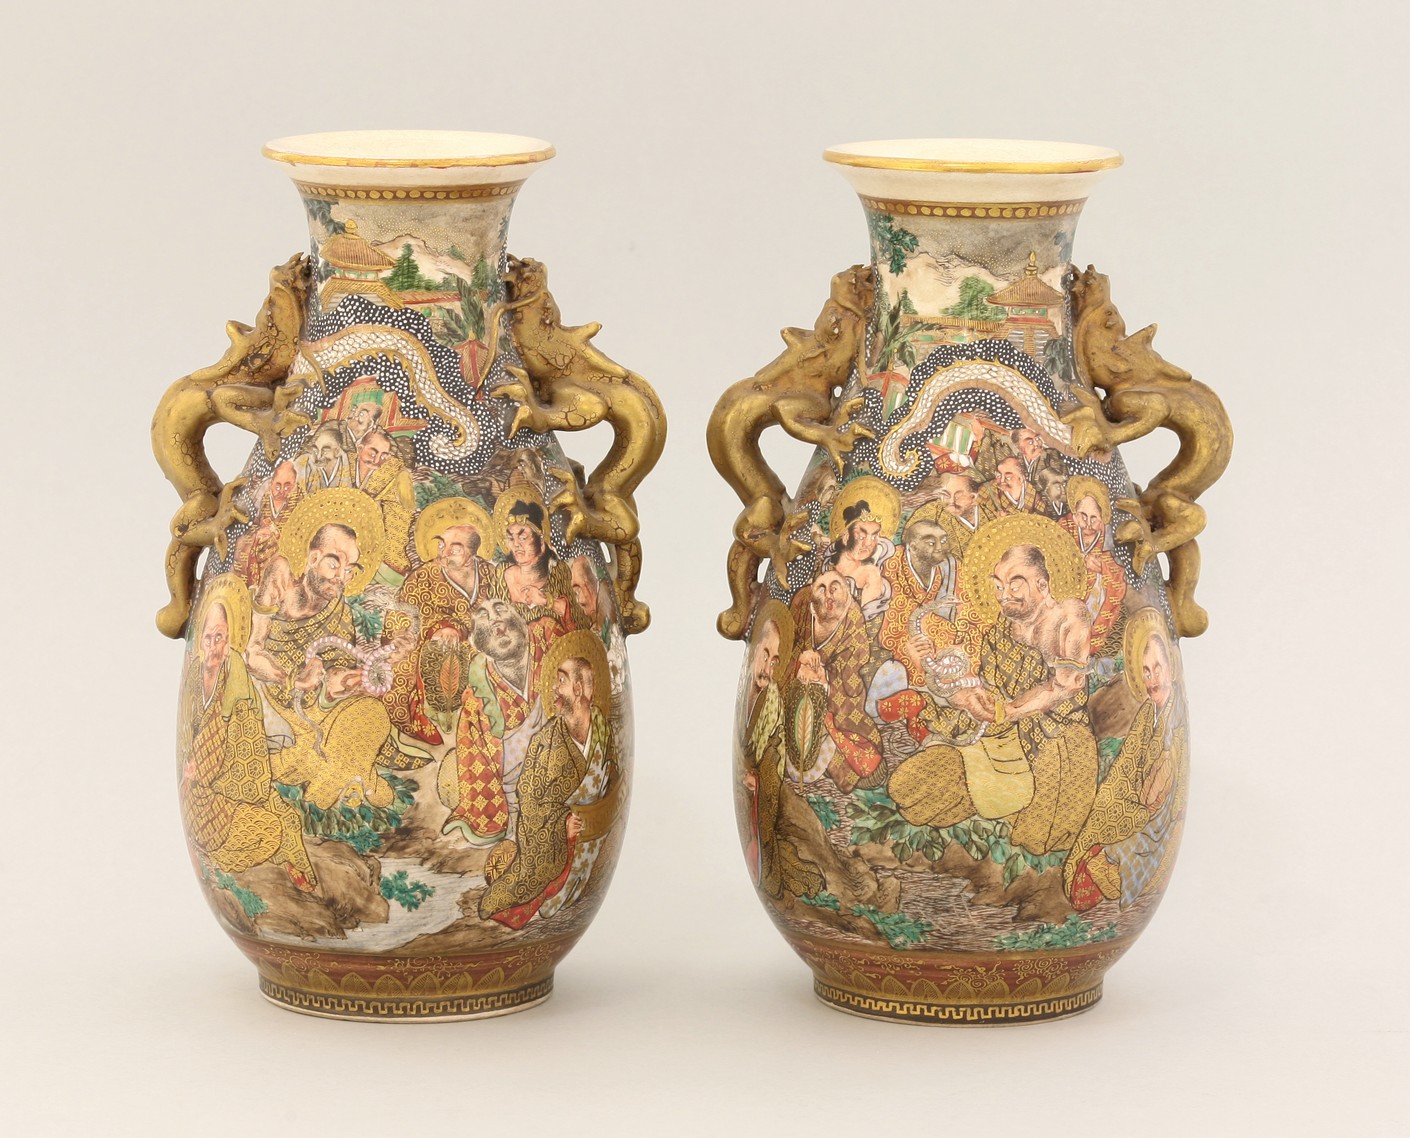 A pair of 'Satsuma' Vases,
c.1880, each of pear shape, painted with Kwannon and a Rakan, the sides